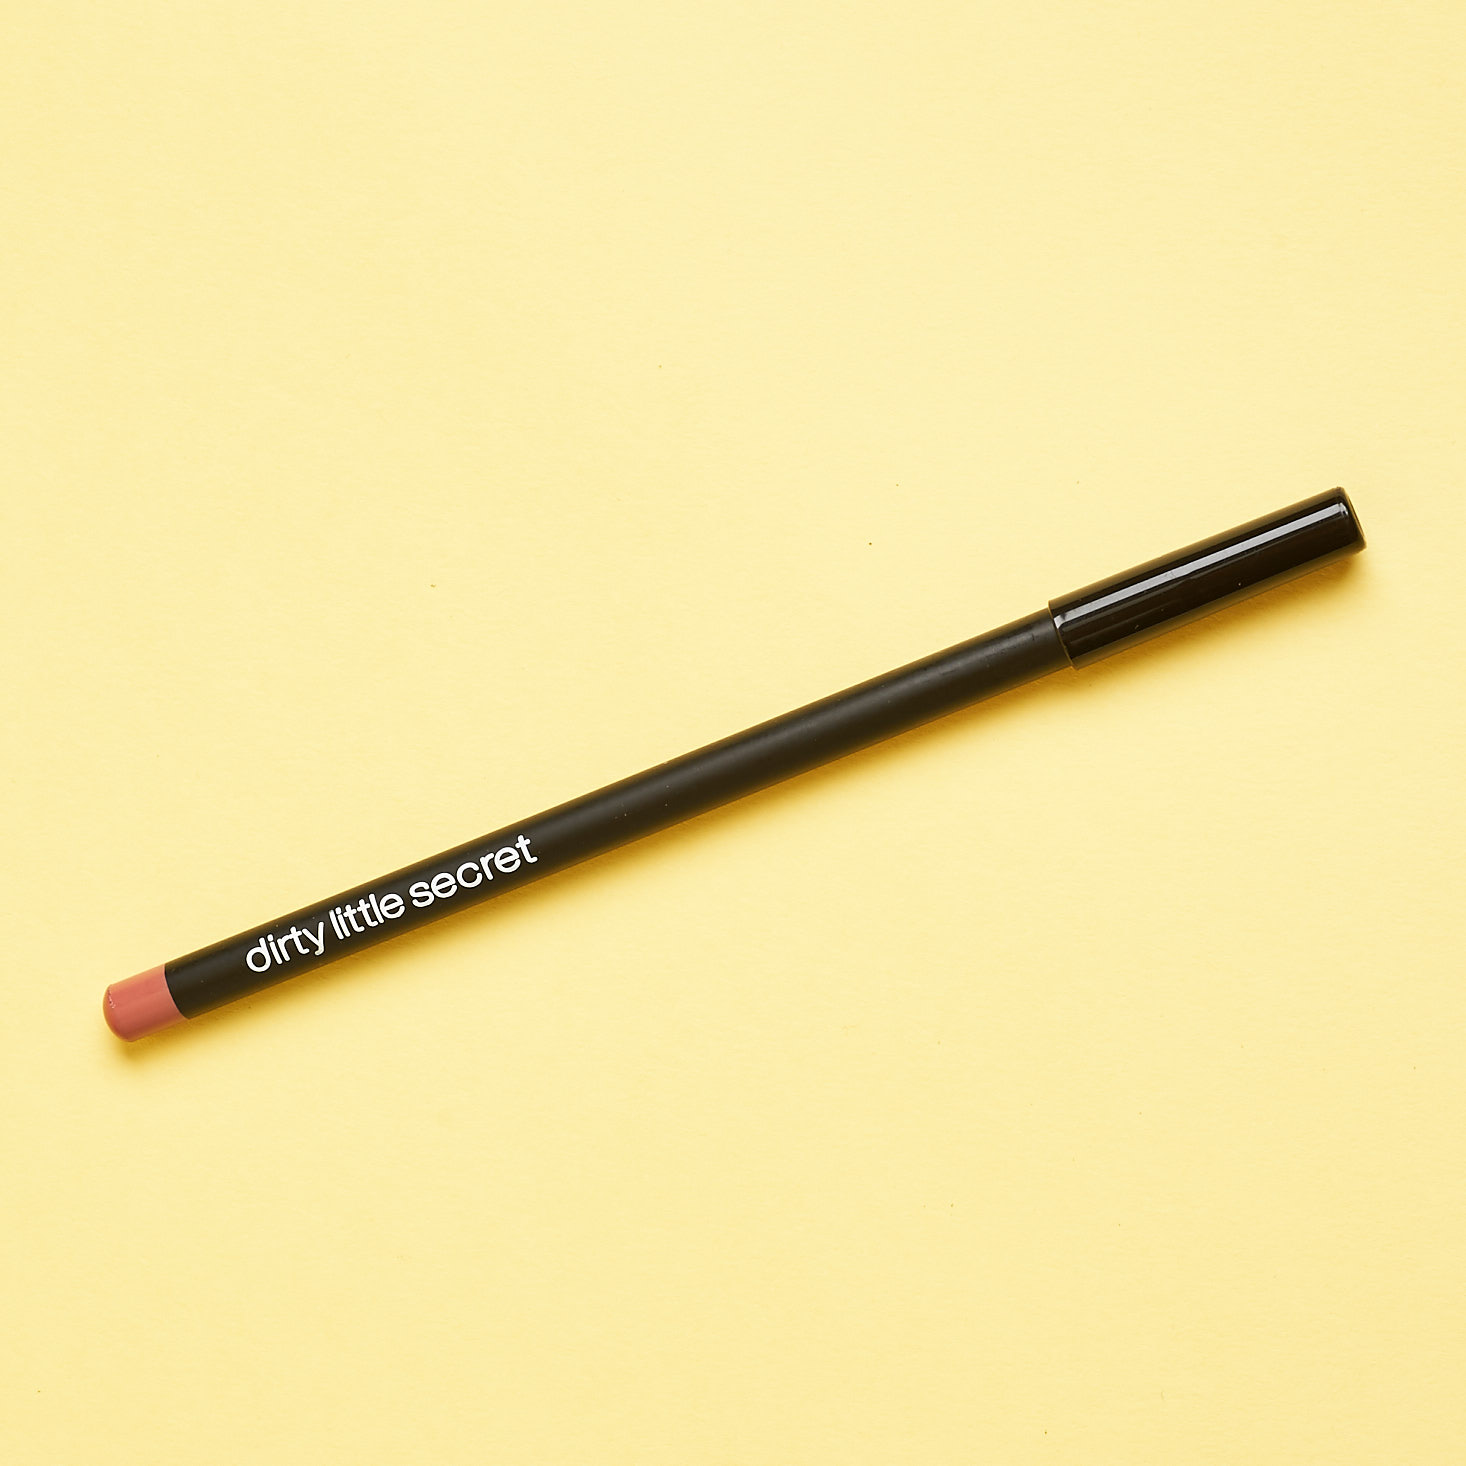 Boxy Charm June 2019 beauty subscription box review lip liner